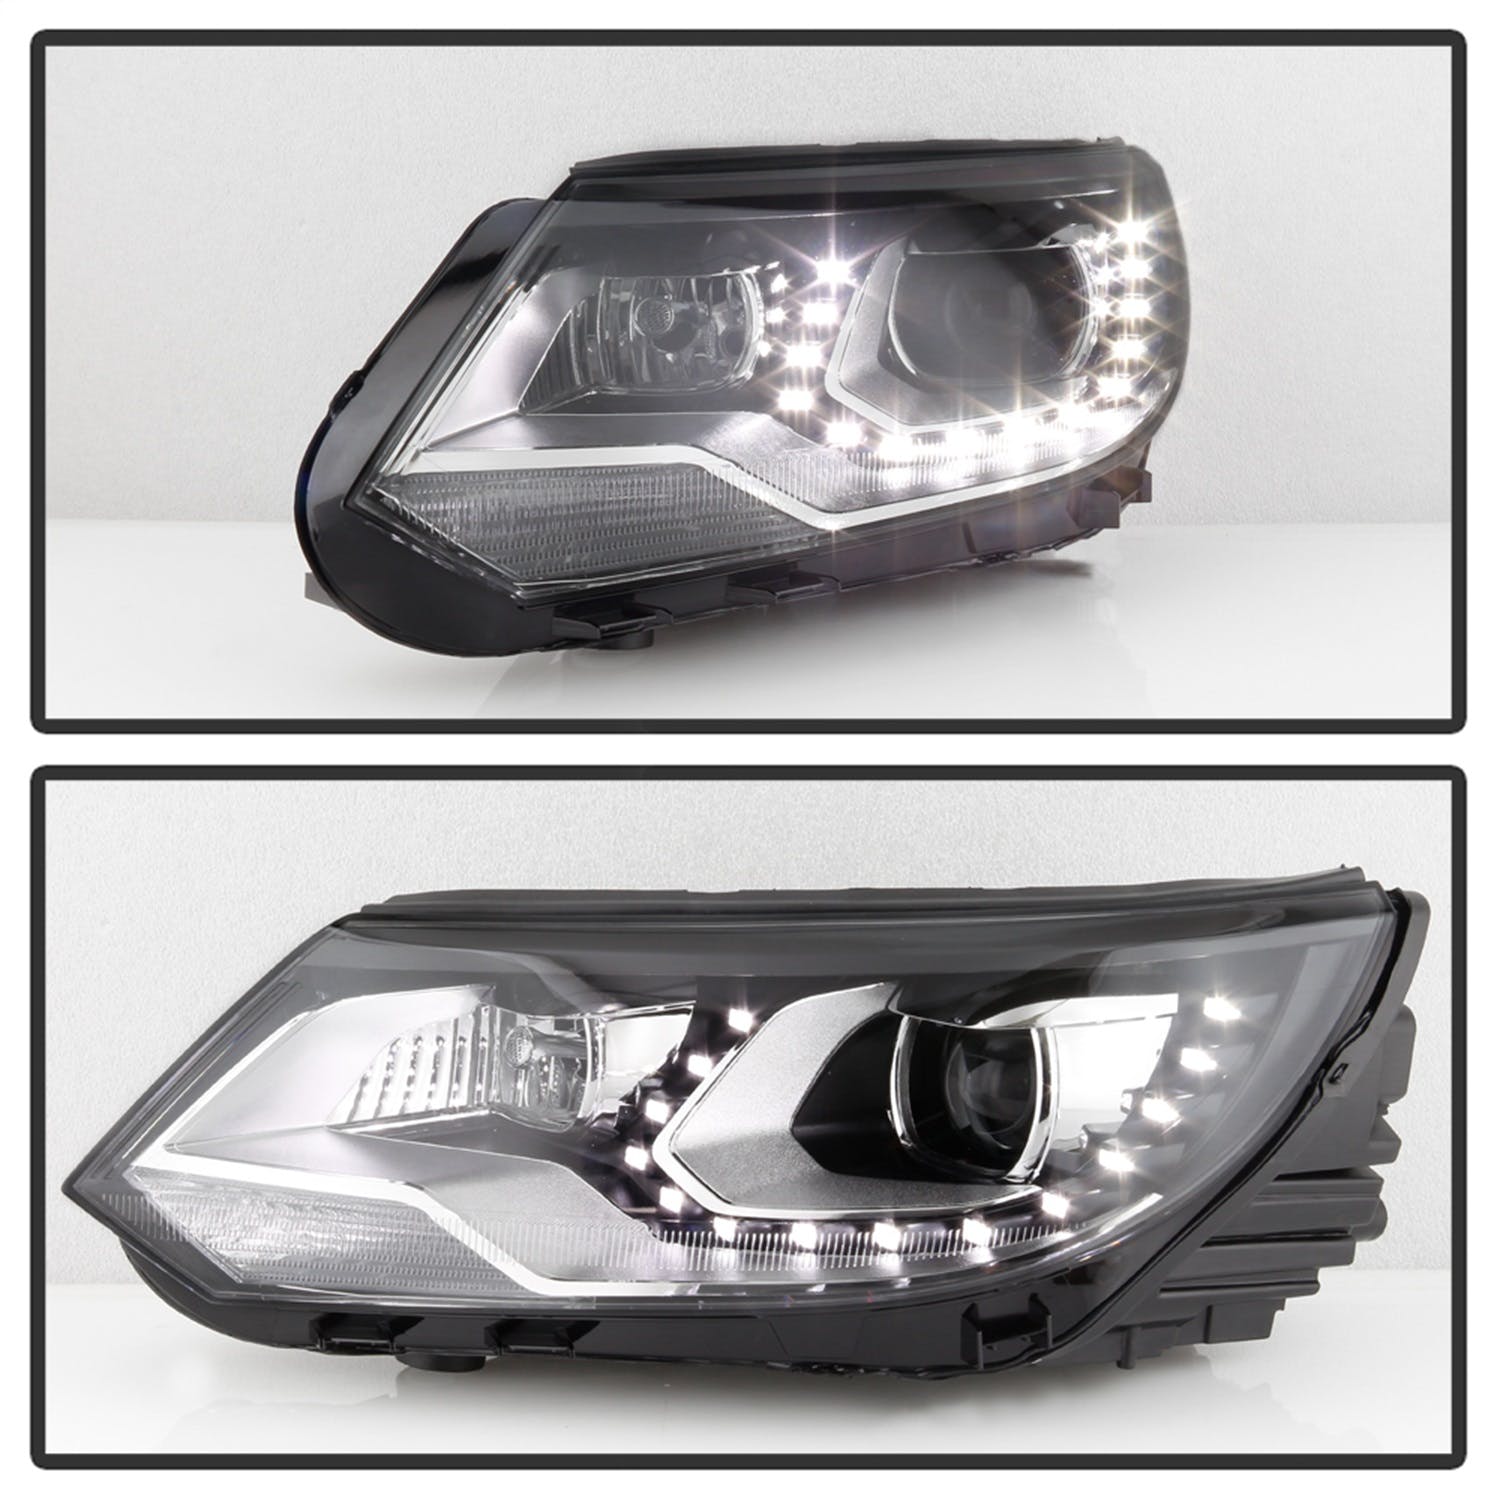 XTUNE POWER 9948527 VW Tiguan 12 17 (Fit OE Halogen Model) LED DRL Projector Headlights Low Beam H7(Included) ; High Beam H7(Included) ; Signal 1156A(Included) Chrome